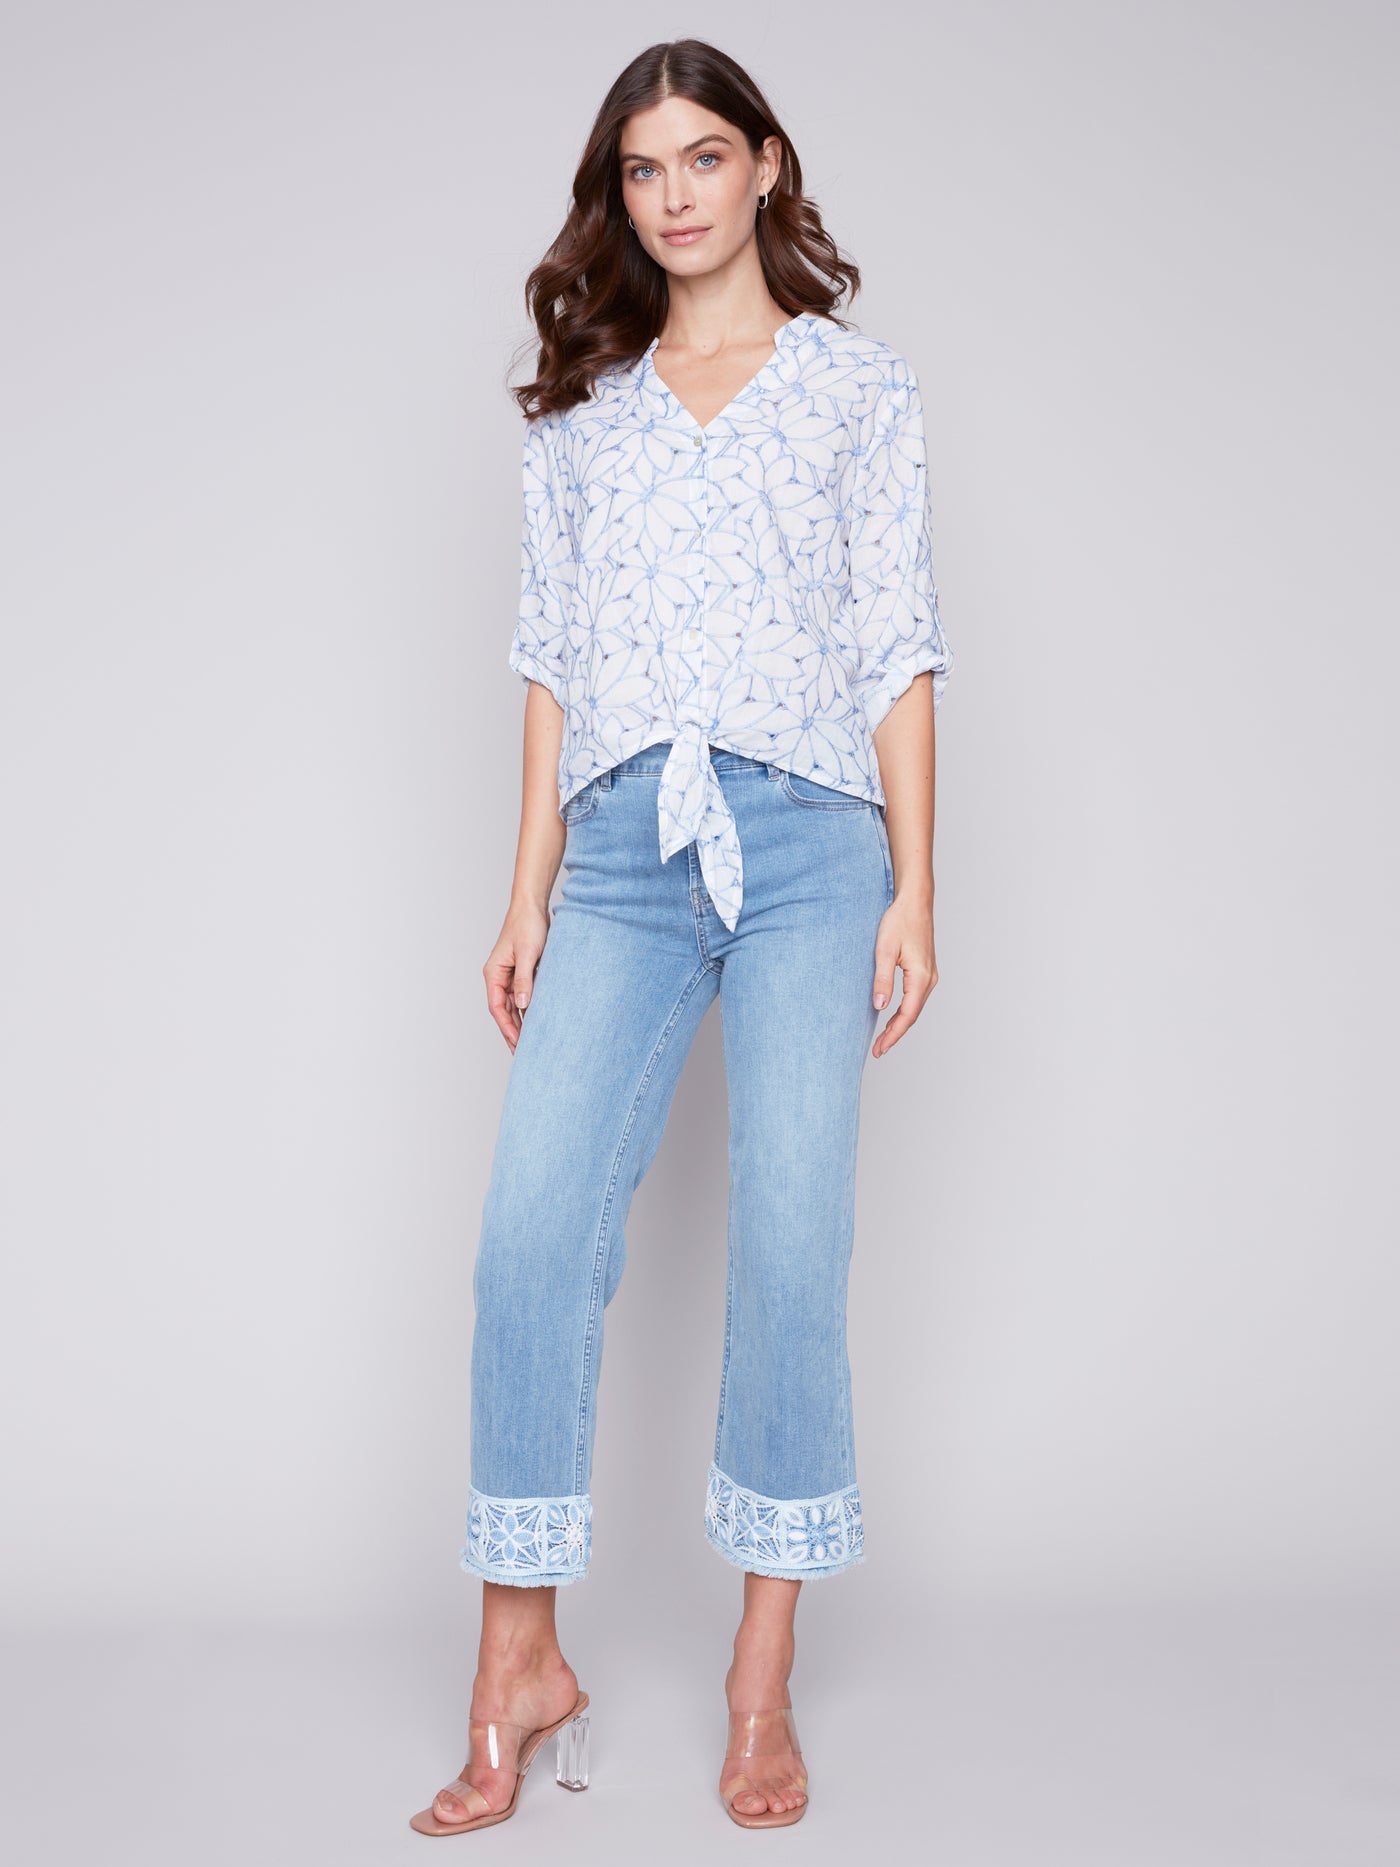 Charlie B Top - Embroidered Blouse - Sky